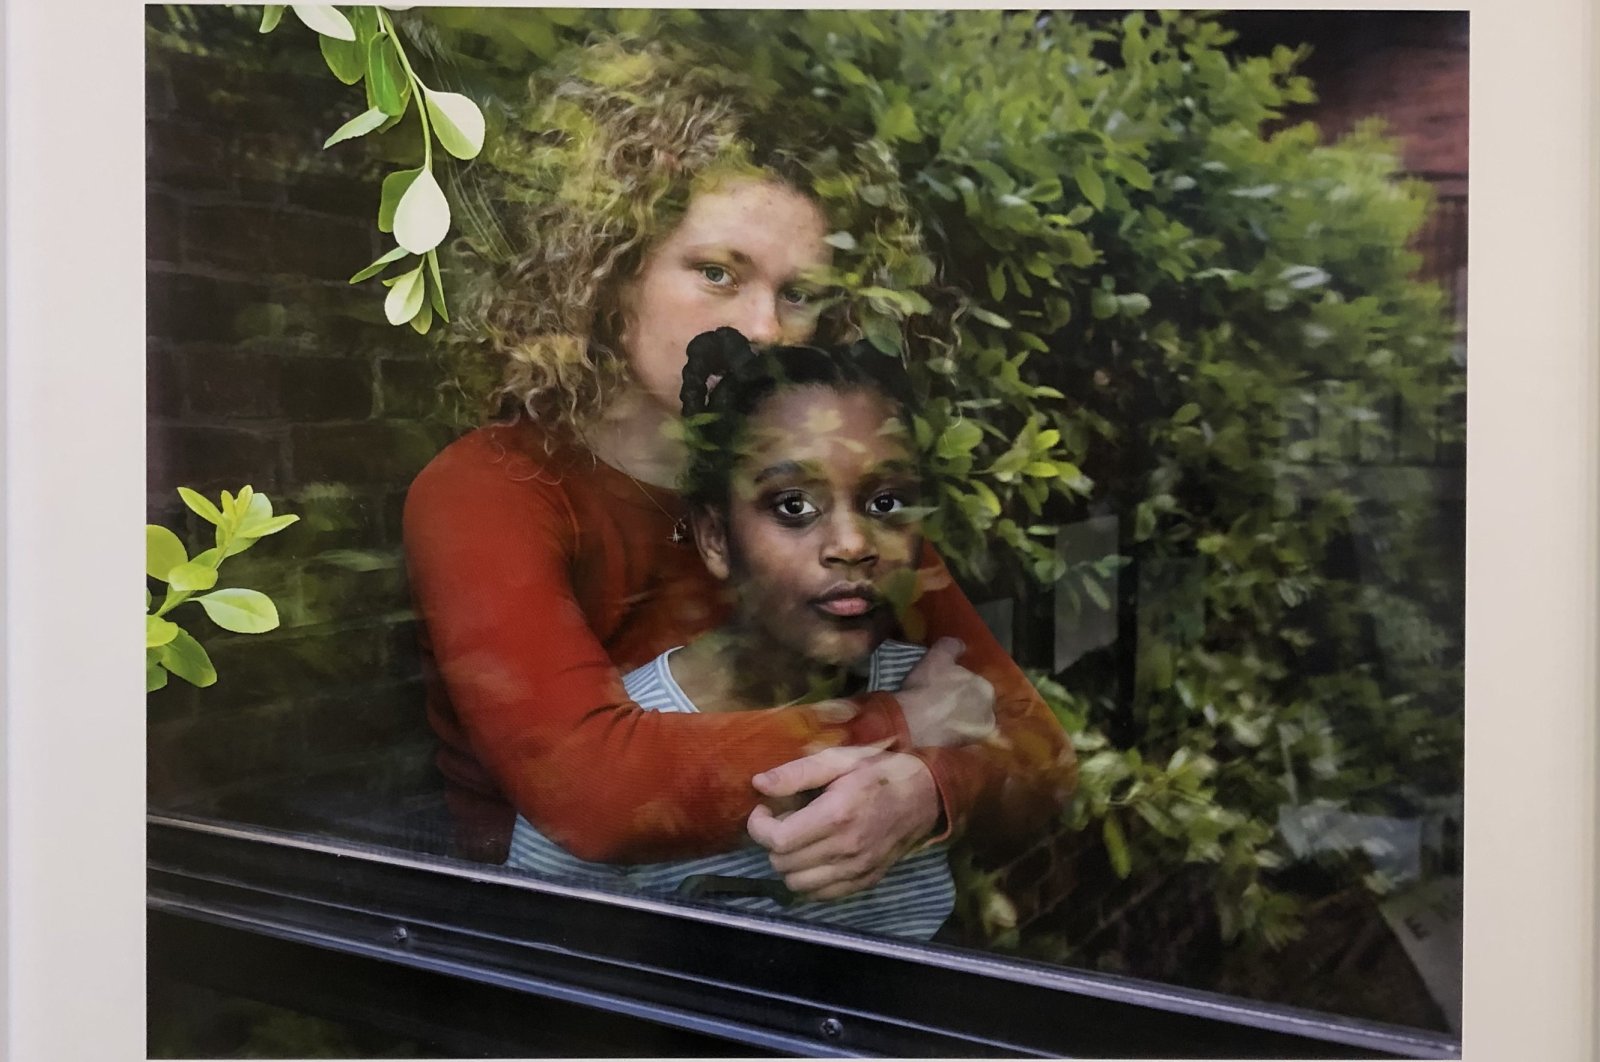 "Orly and Ruth," 2020, the series Across the Window - Portraits During COVID-19 (2020-ongoing), archival pigment print on baryta paper. (Photo by Matt Hanson)